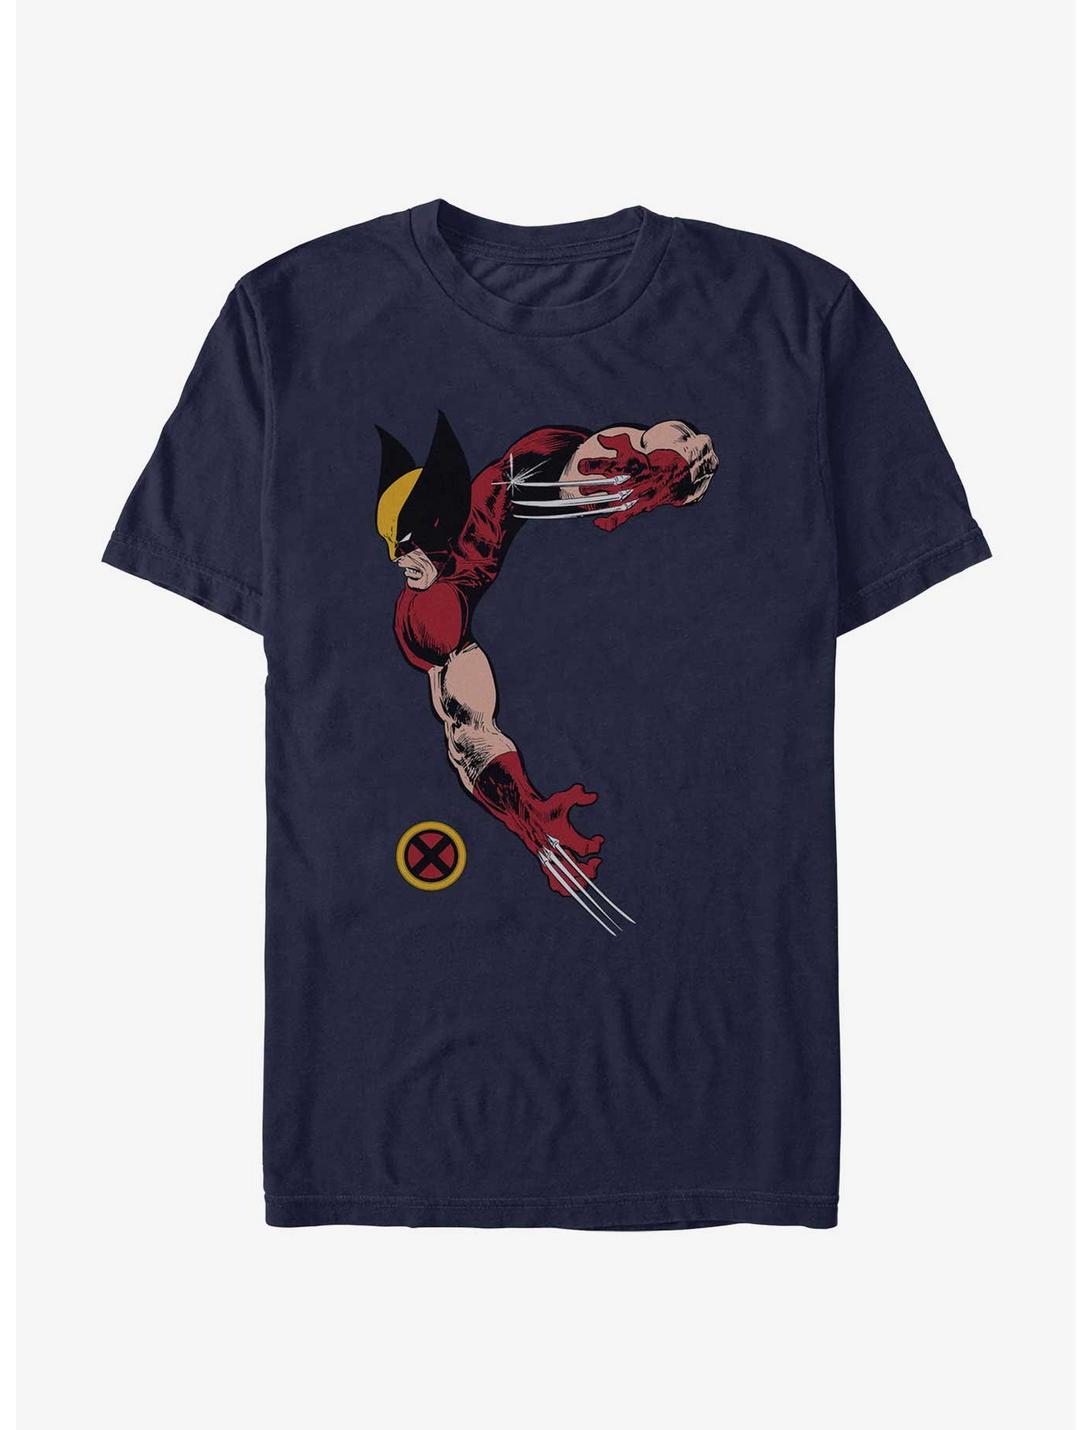 Marvel X-Men Wolverine Ready To Go Claws T-Shirt, NAVY, hi-res